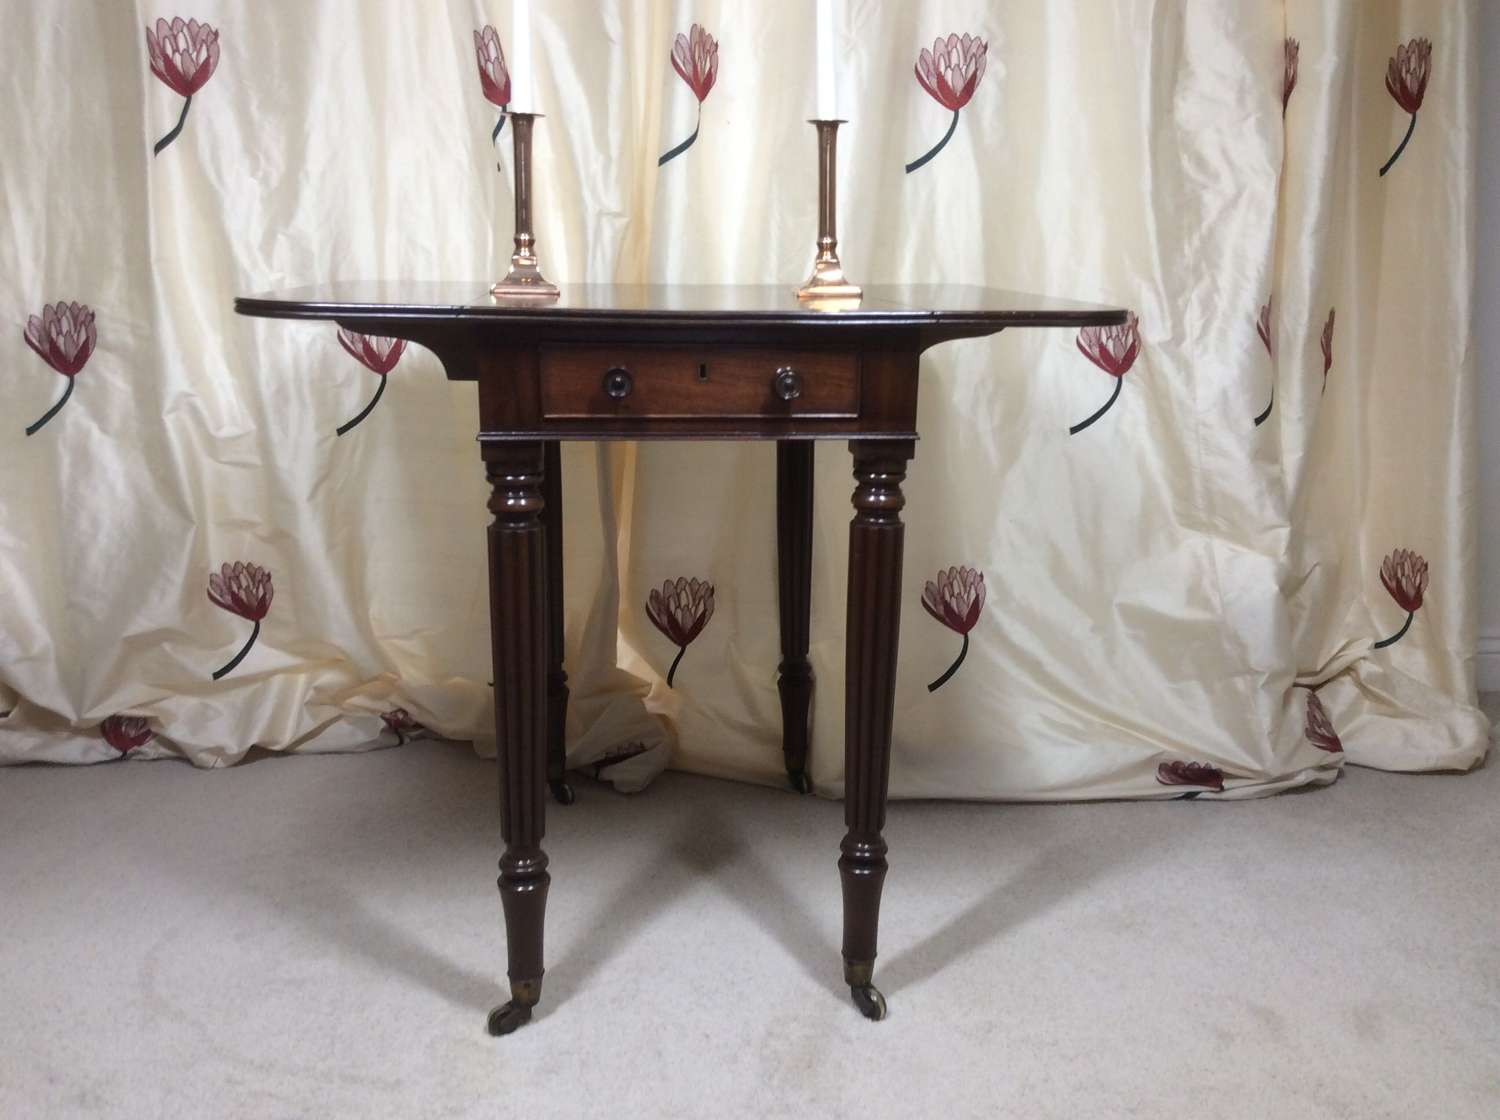 William IV Mahogany Pembroke Table in the manner of Gillows